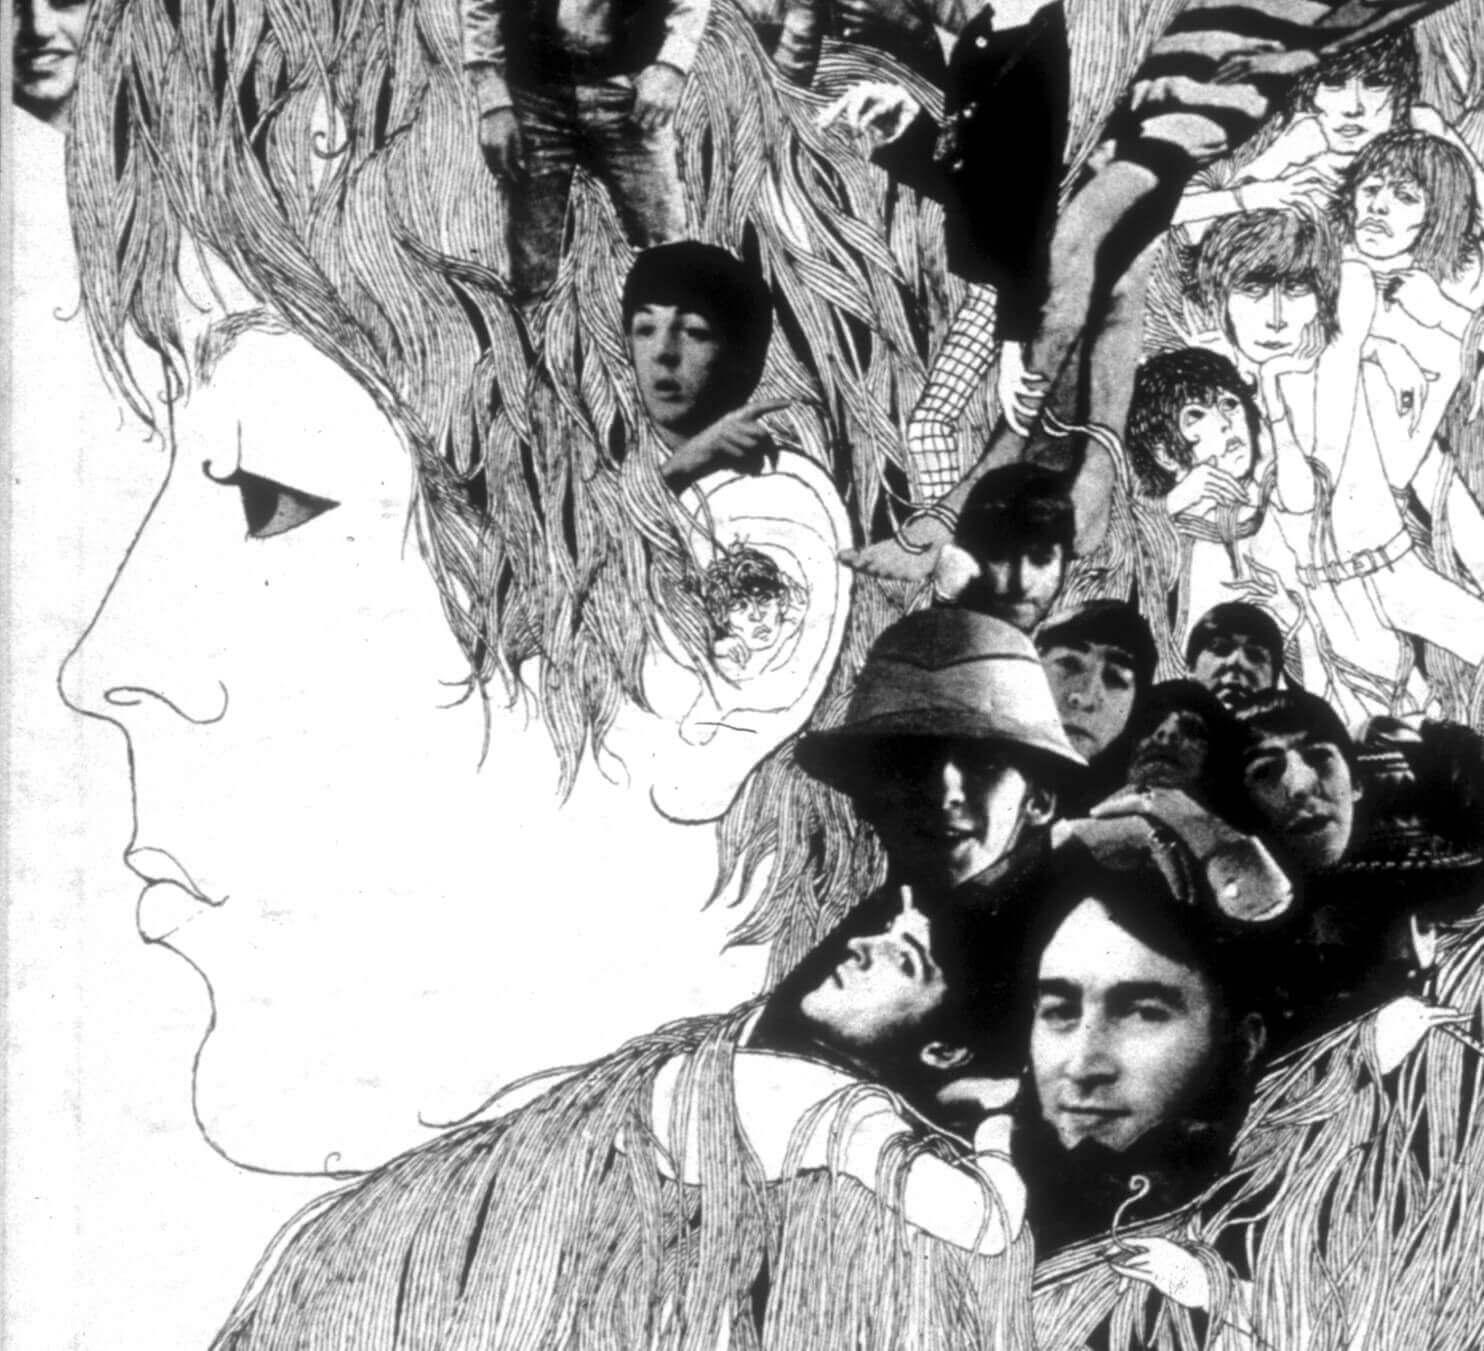 Part of the cover of The Beatles' 'Revolver'